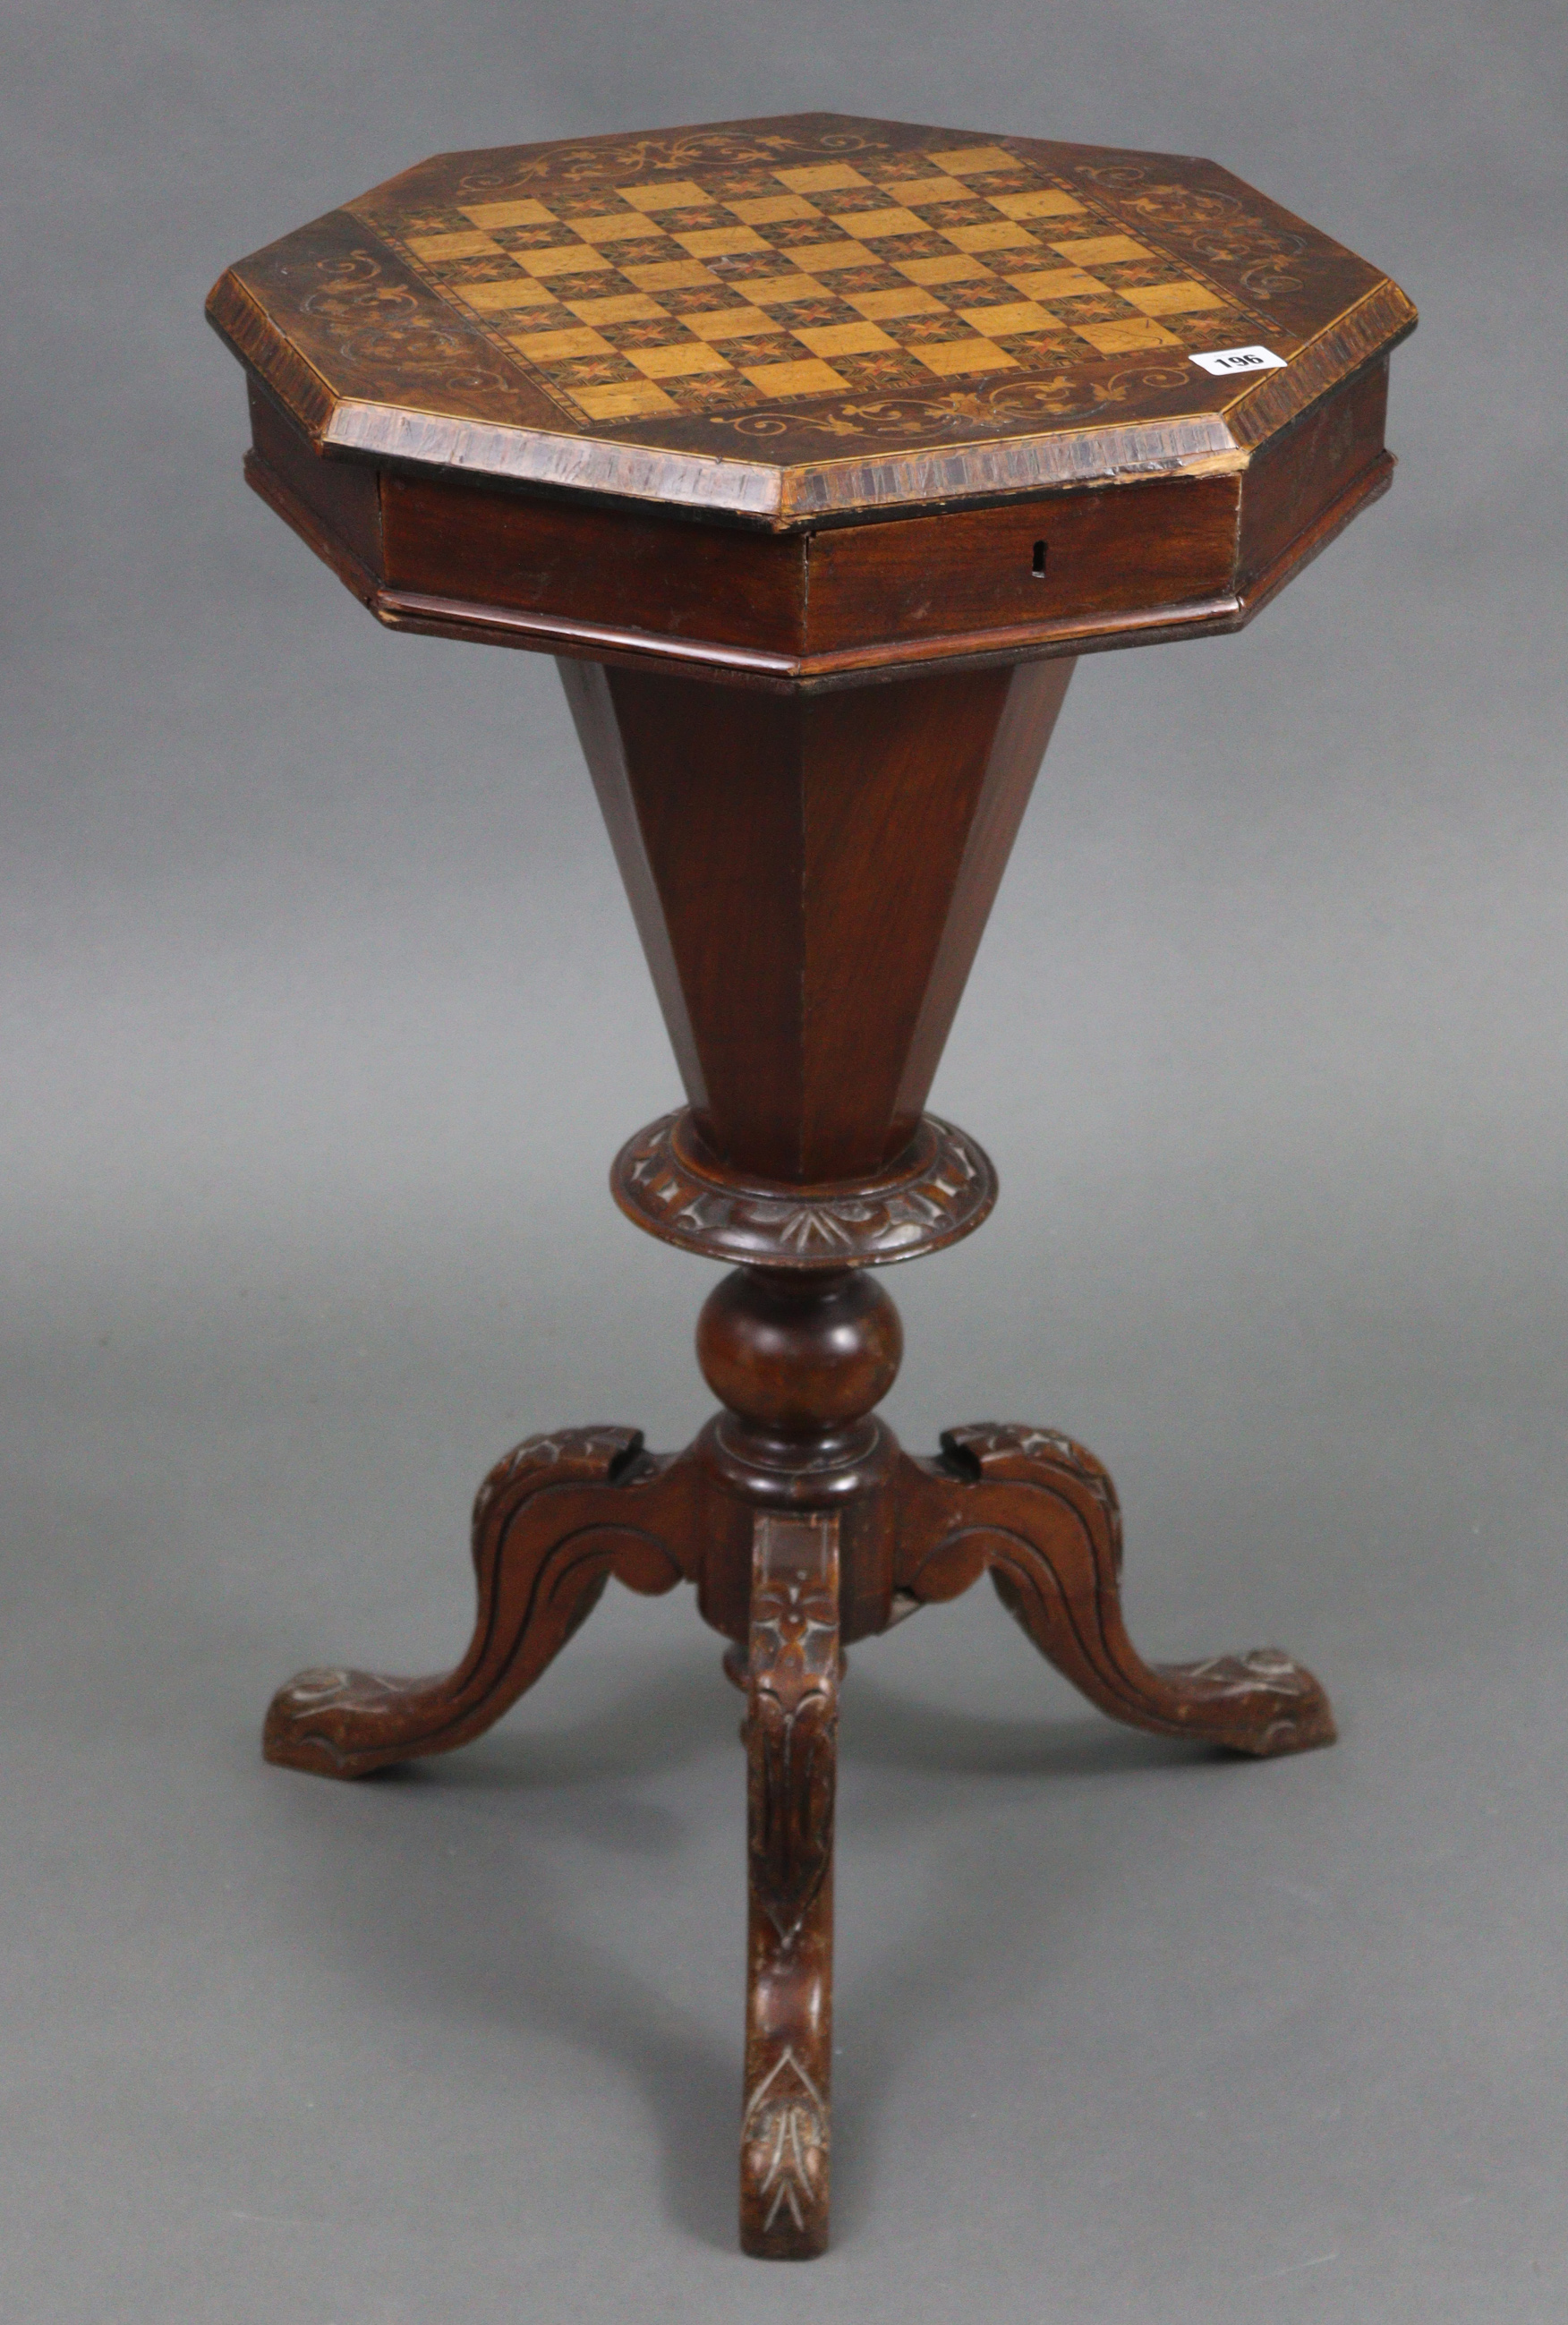 A Victorian marquetry-inlaid mahogany sewing table, inset chessboard to the octagonal hinged